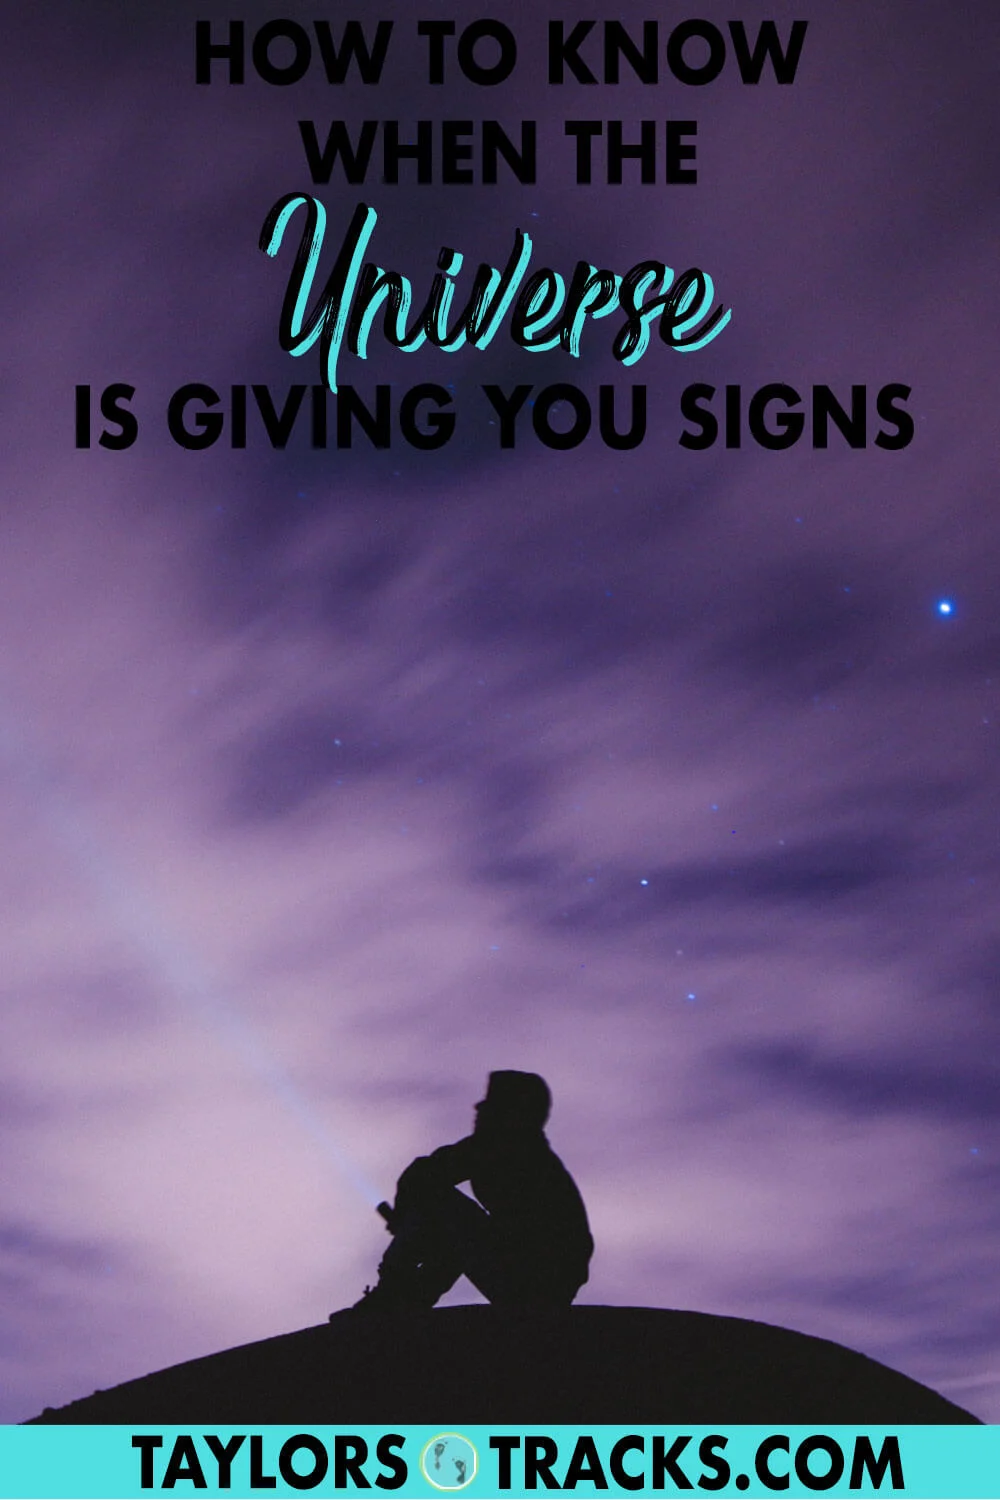 How do you know when you’re getting signs from the universe? How do you know if the universe is communicating with you? The universe is most likely already showing you signs, you just have to know what to look out for. Click to find out 5 simple ways to know if the universe is already sending you signs!